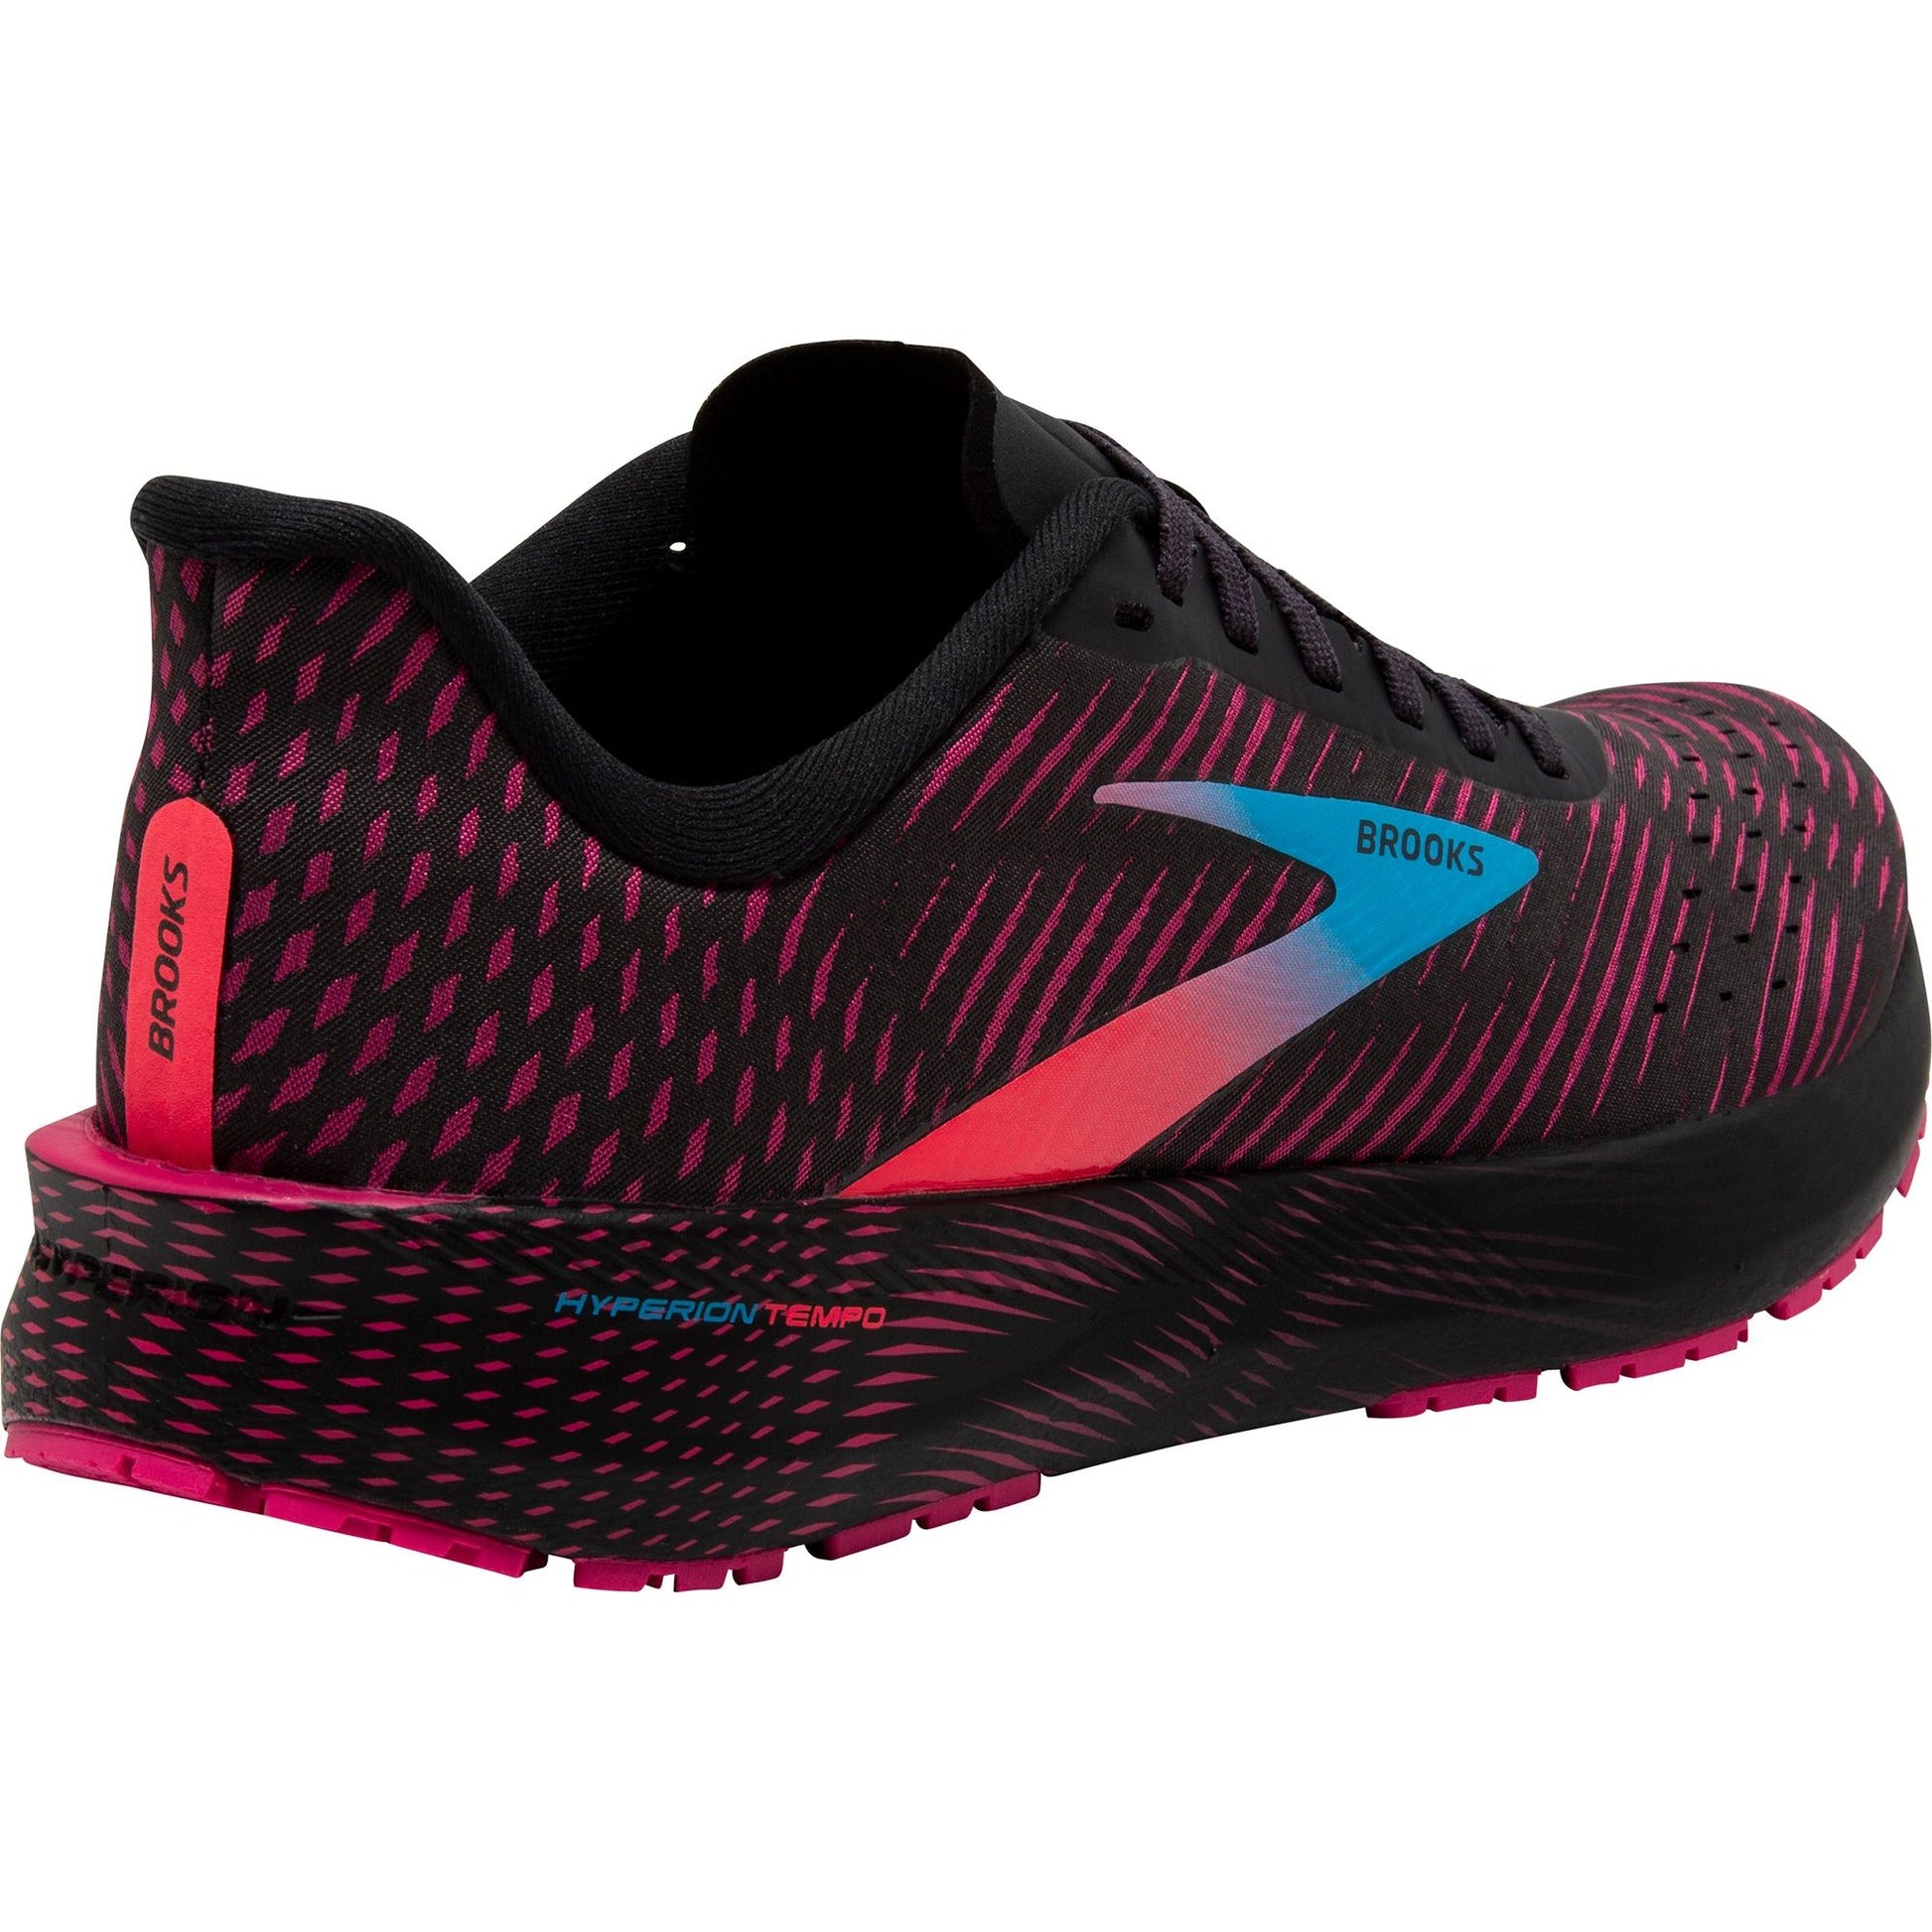 Brooks Hyperion Tempo  Back View